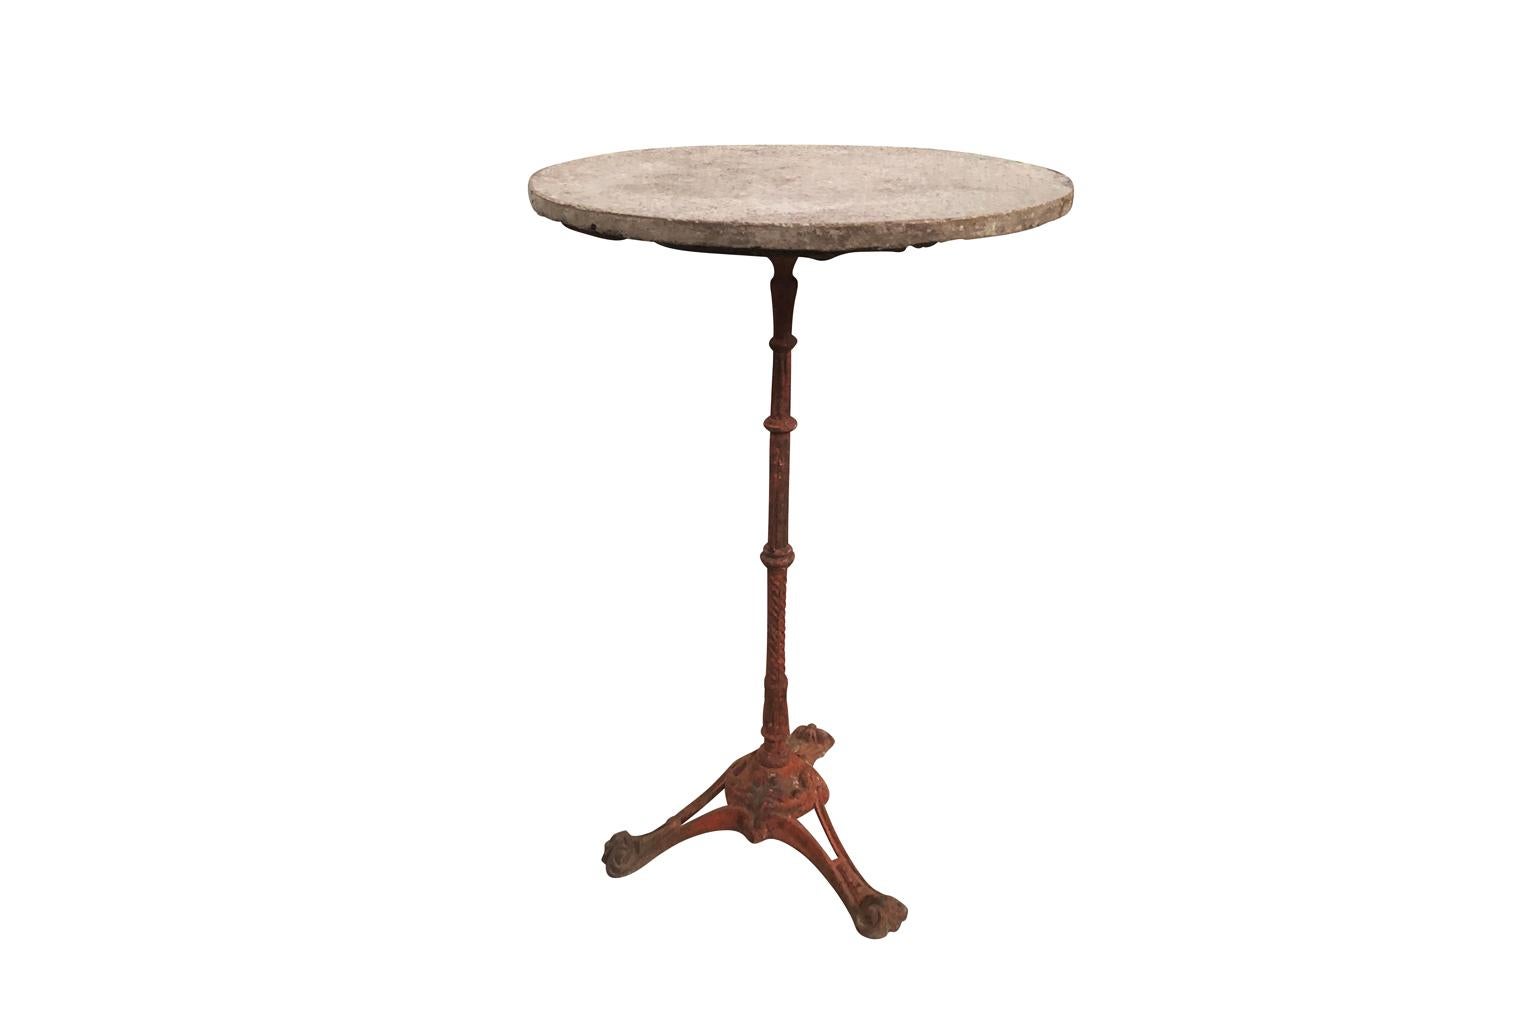 A delightful later 19th century French Bistro Gueridon. This more unique bistro table is composed of beautifully painted cast iron base and a lovely stone top. Super patina. The bistro table will and charm and character to any garden or interior.